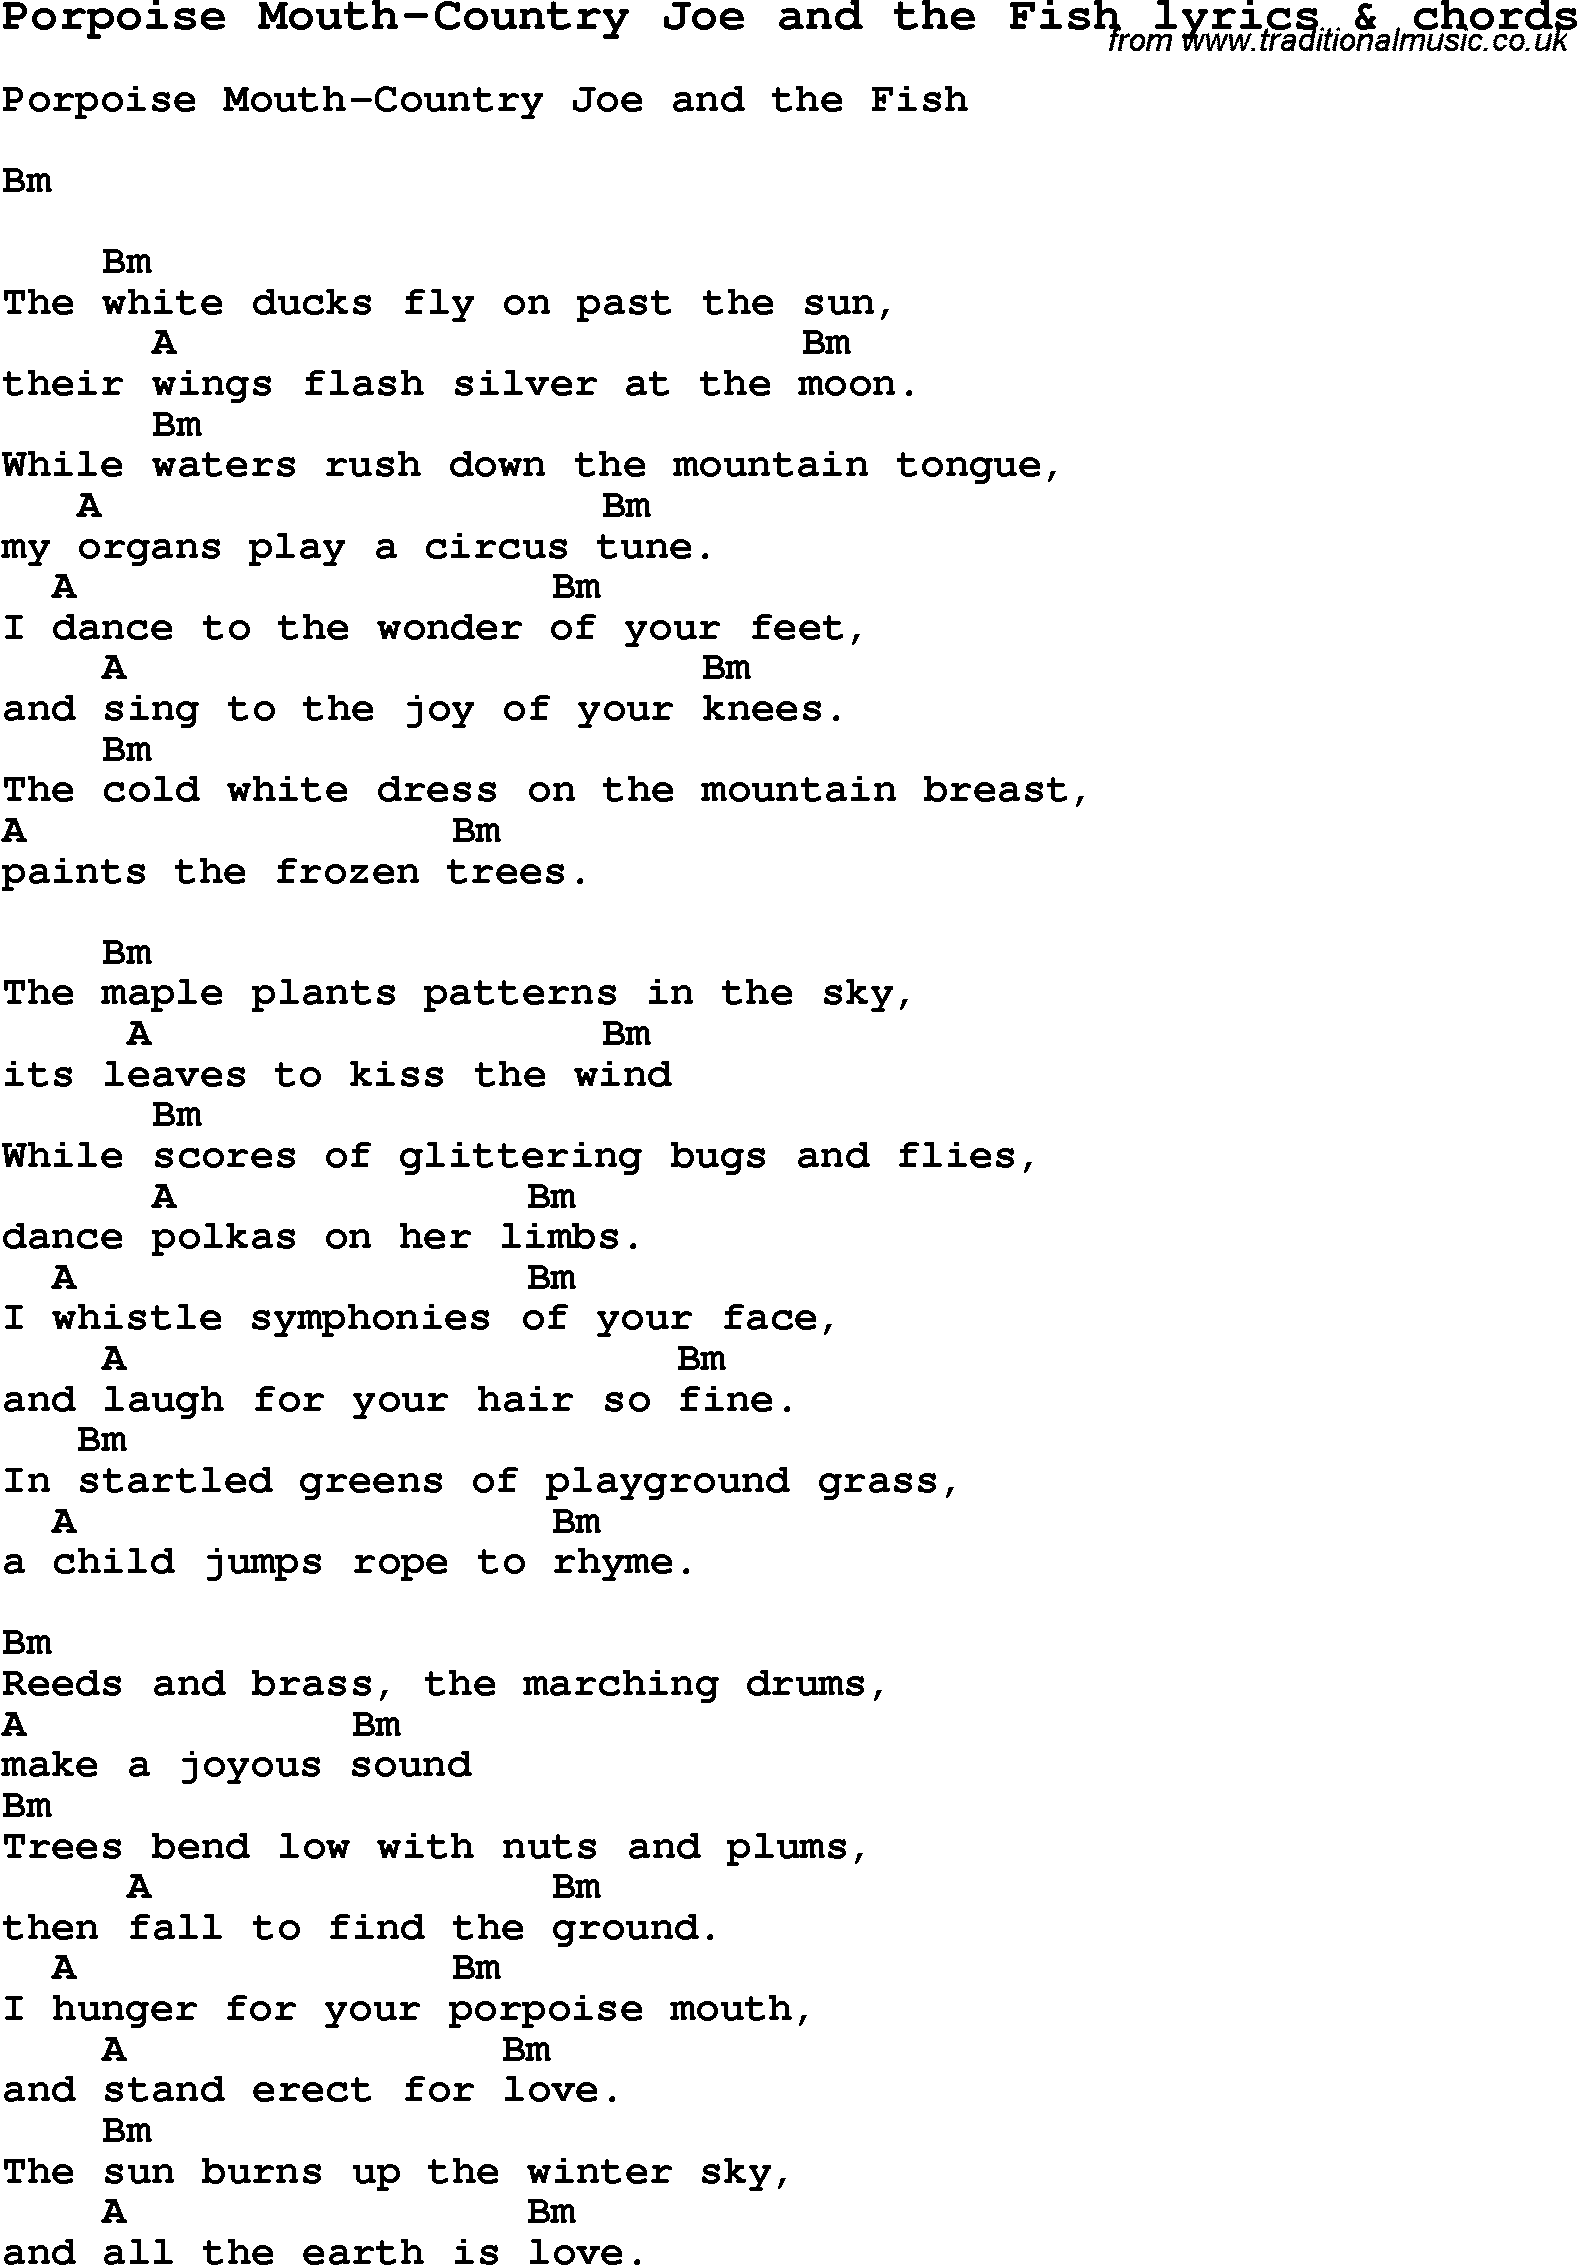 Love Song Lyrics for: Porpoise Mouth-Country Joe and the Fish with chords for Ukulele, Guitar Banjo etc.